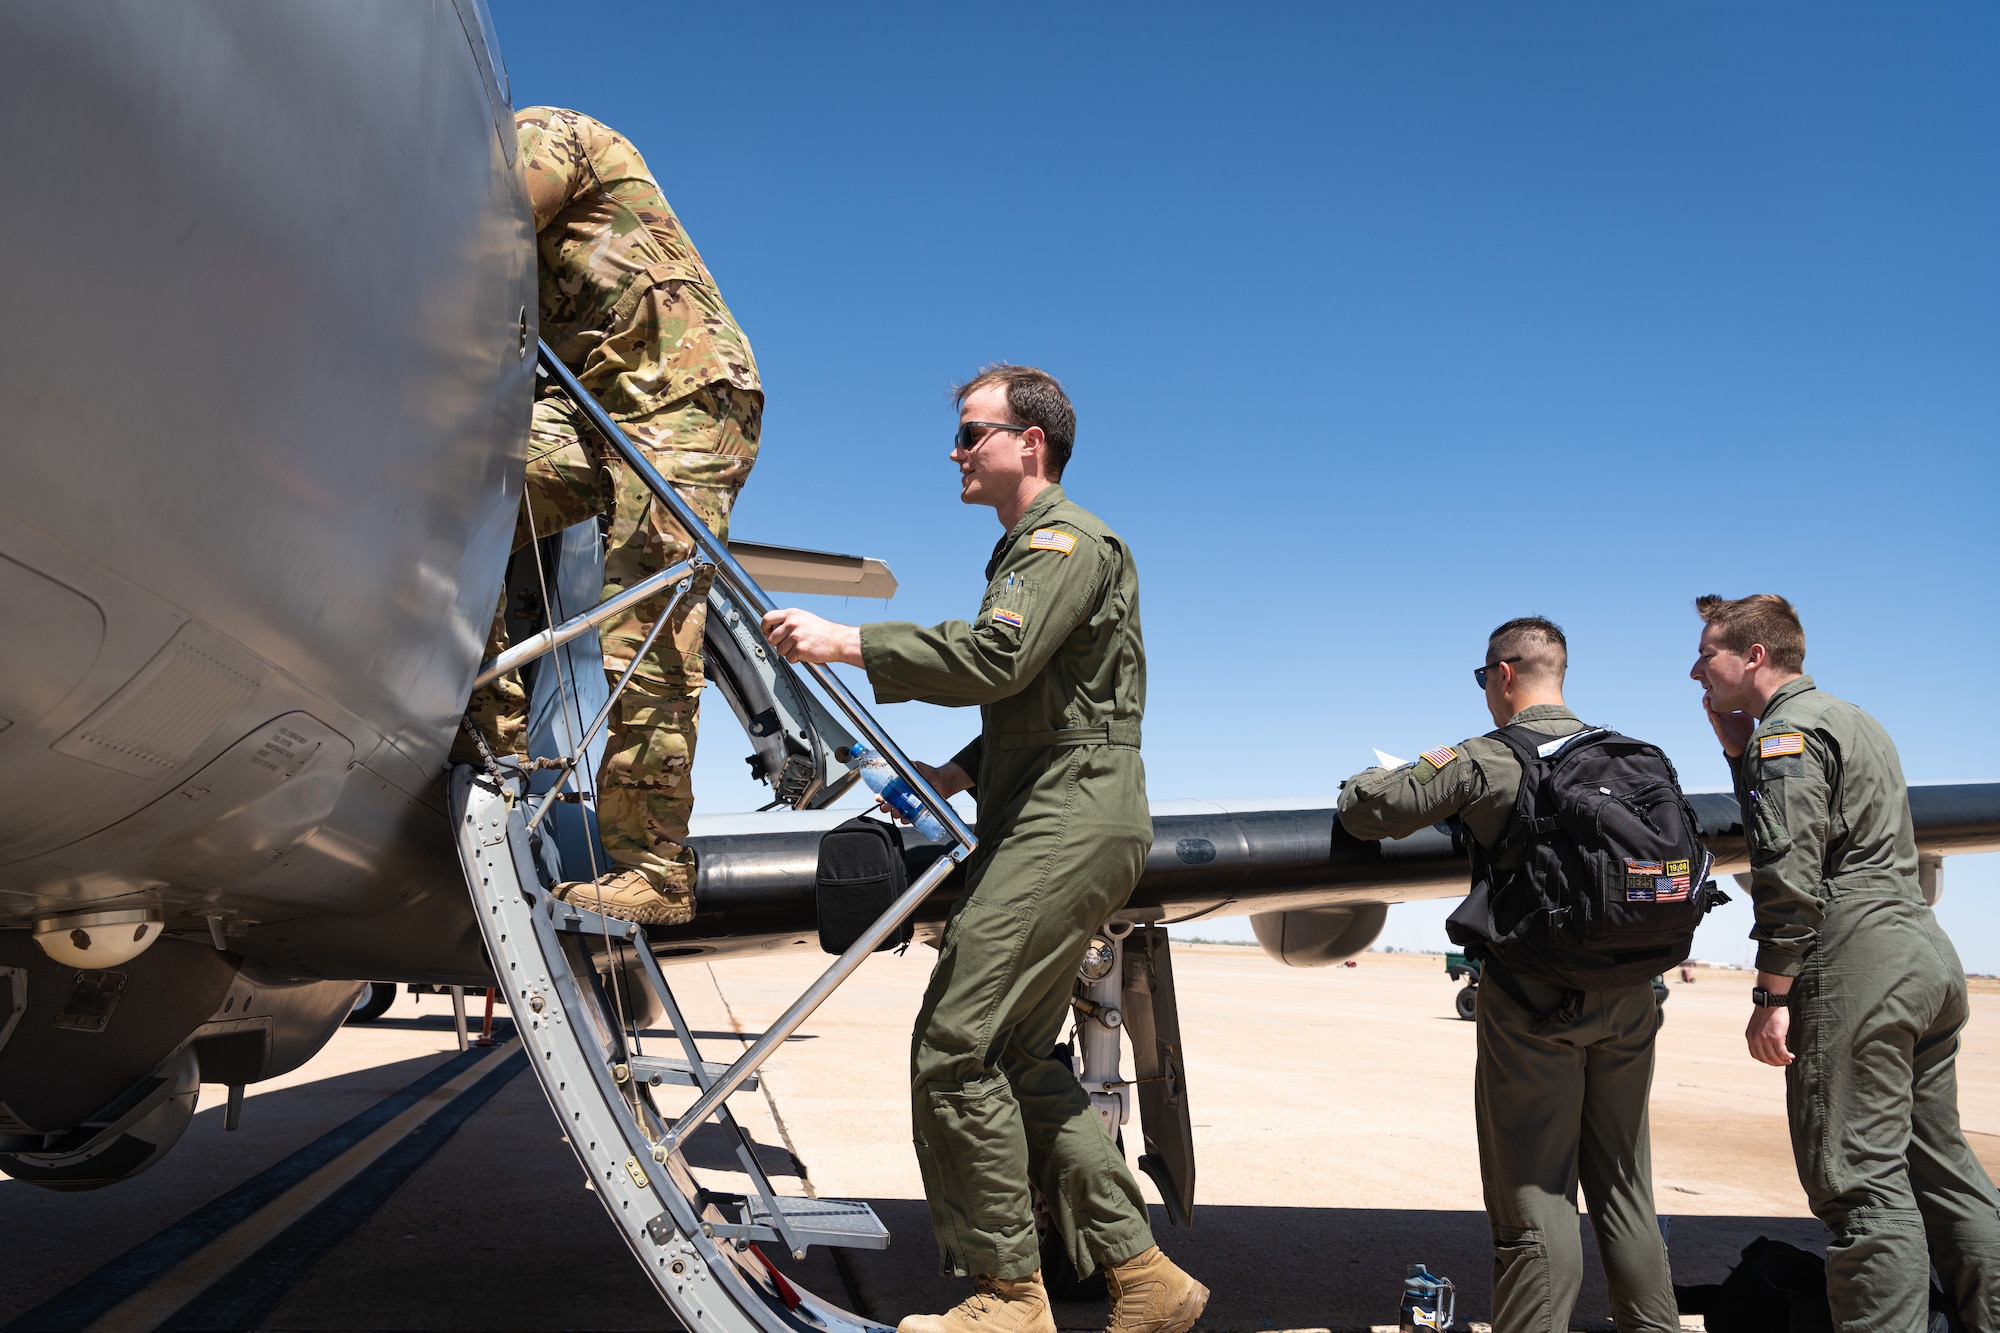 Two Airmen climb into a small plane while two other Airmen look at the plane's wing